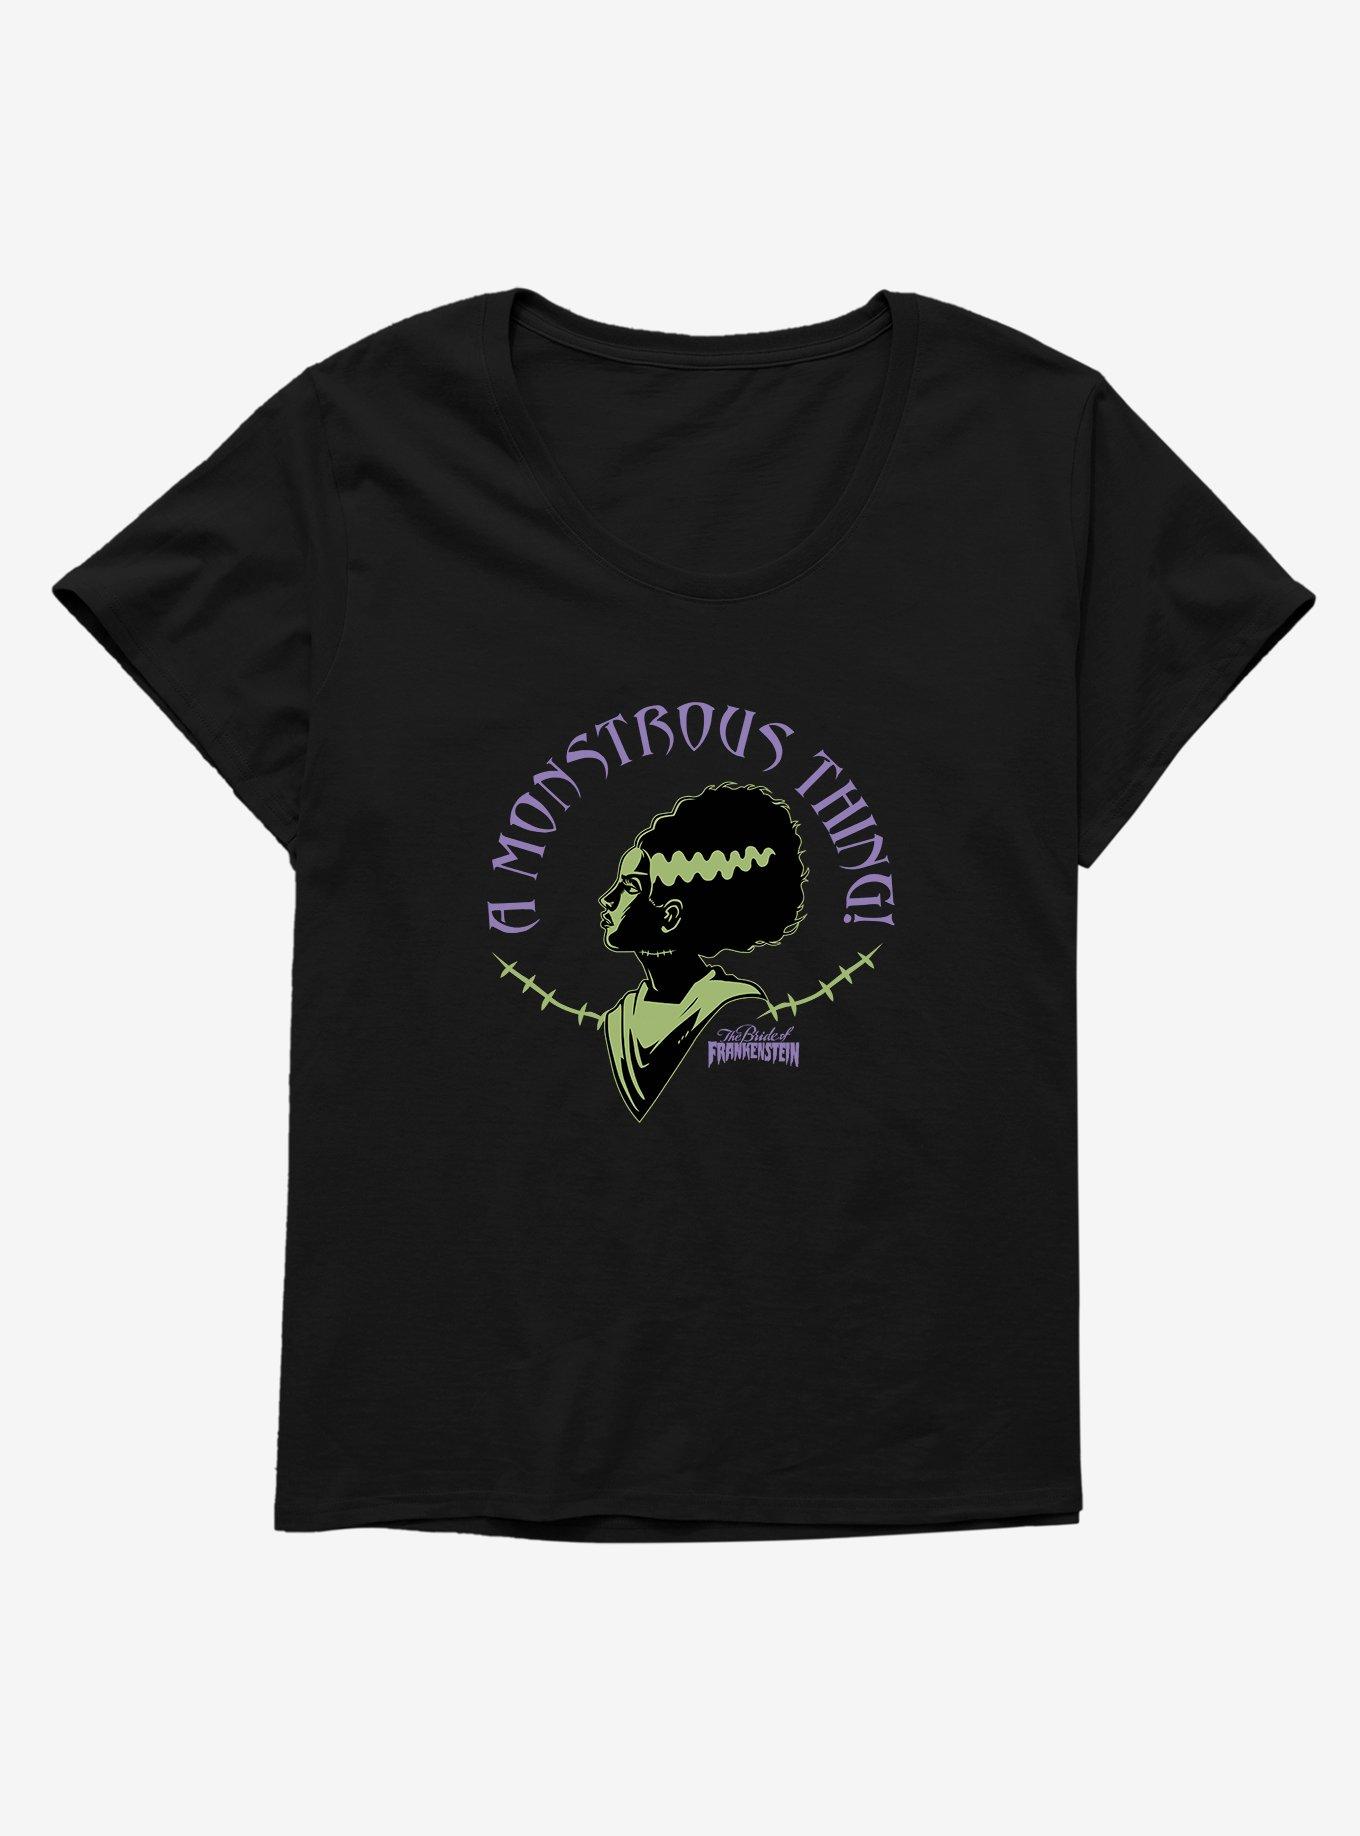 Bride Of Frankenstein A Monstrous Thing Girls T-Shirt Plus